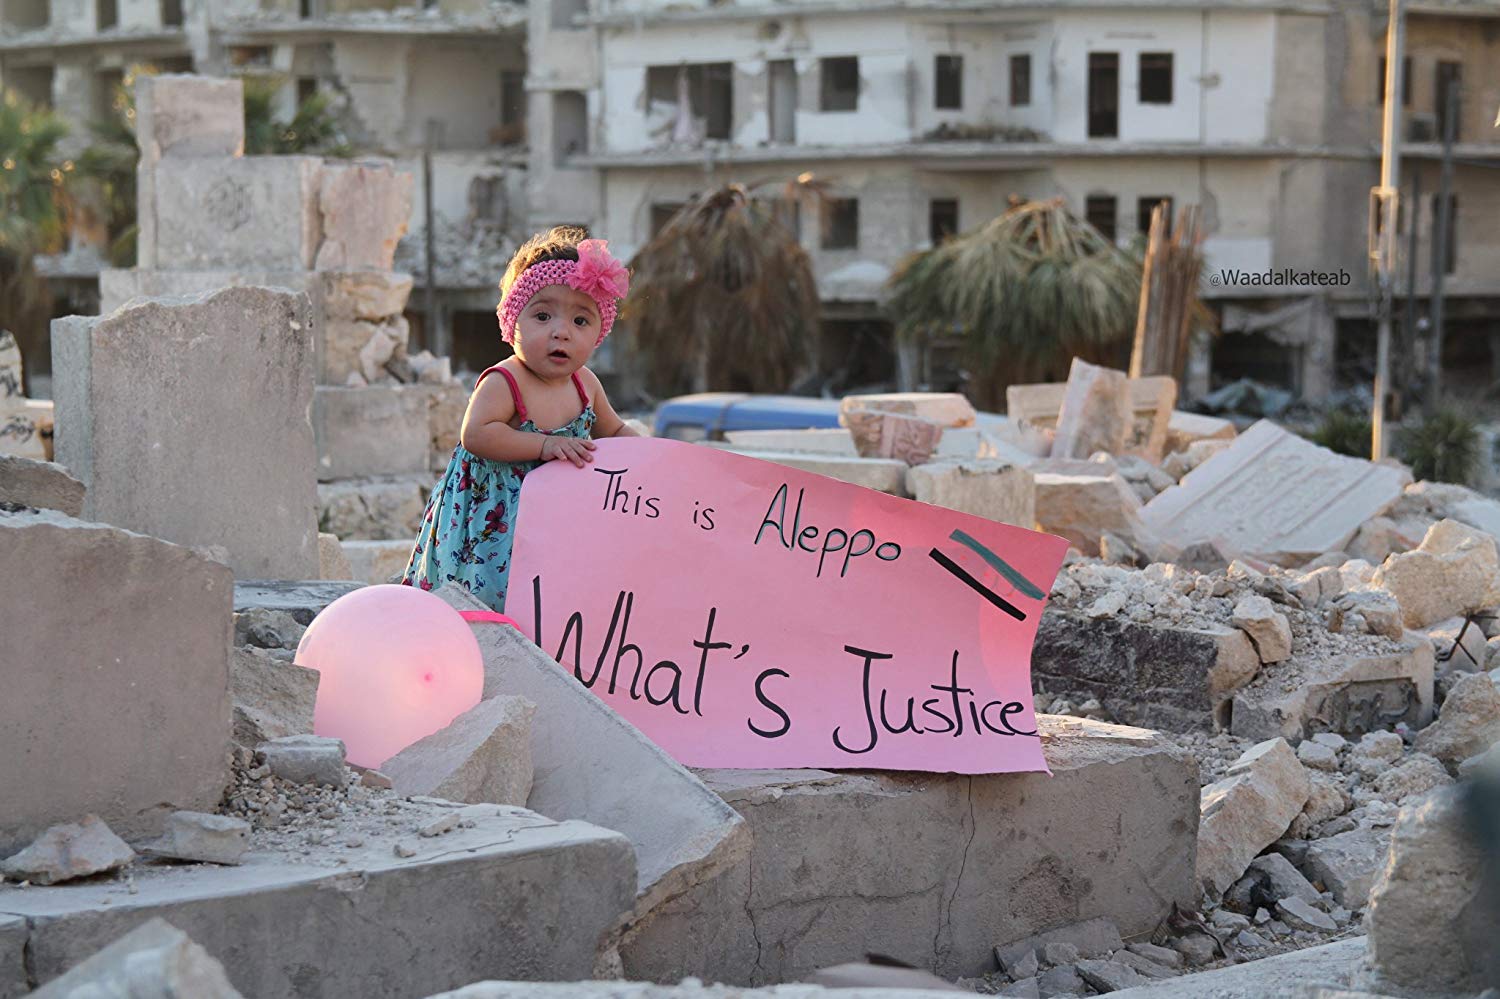 A scene from the documentary “For Sama” showing a toddler amid the wreckage of Aleppo holding a sign that reads, “What’s justice.”